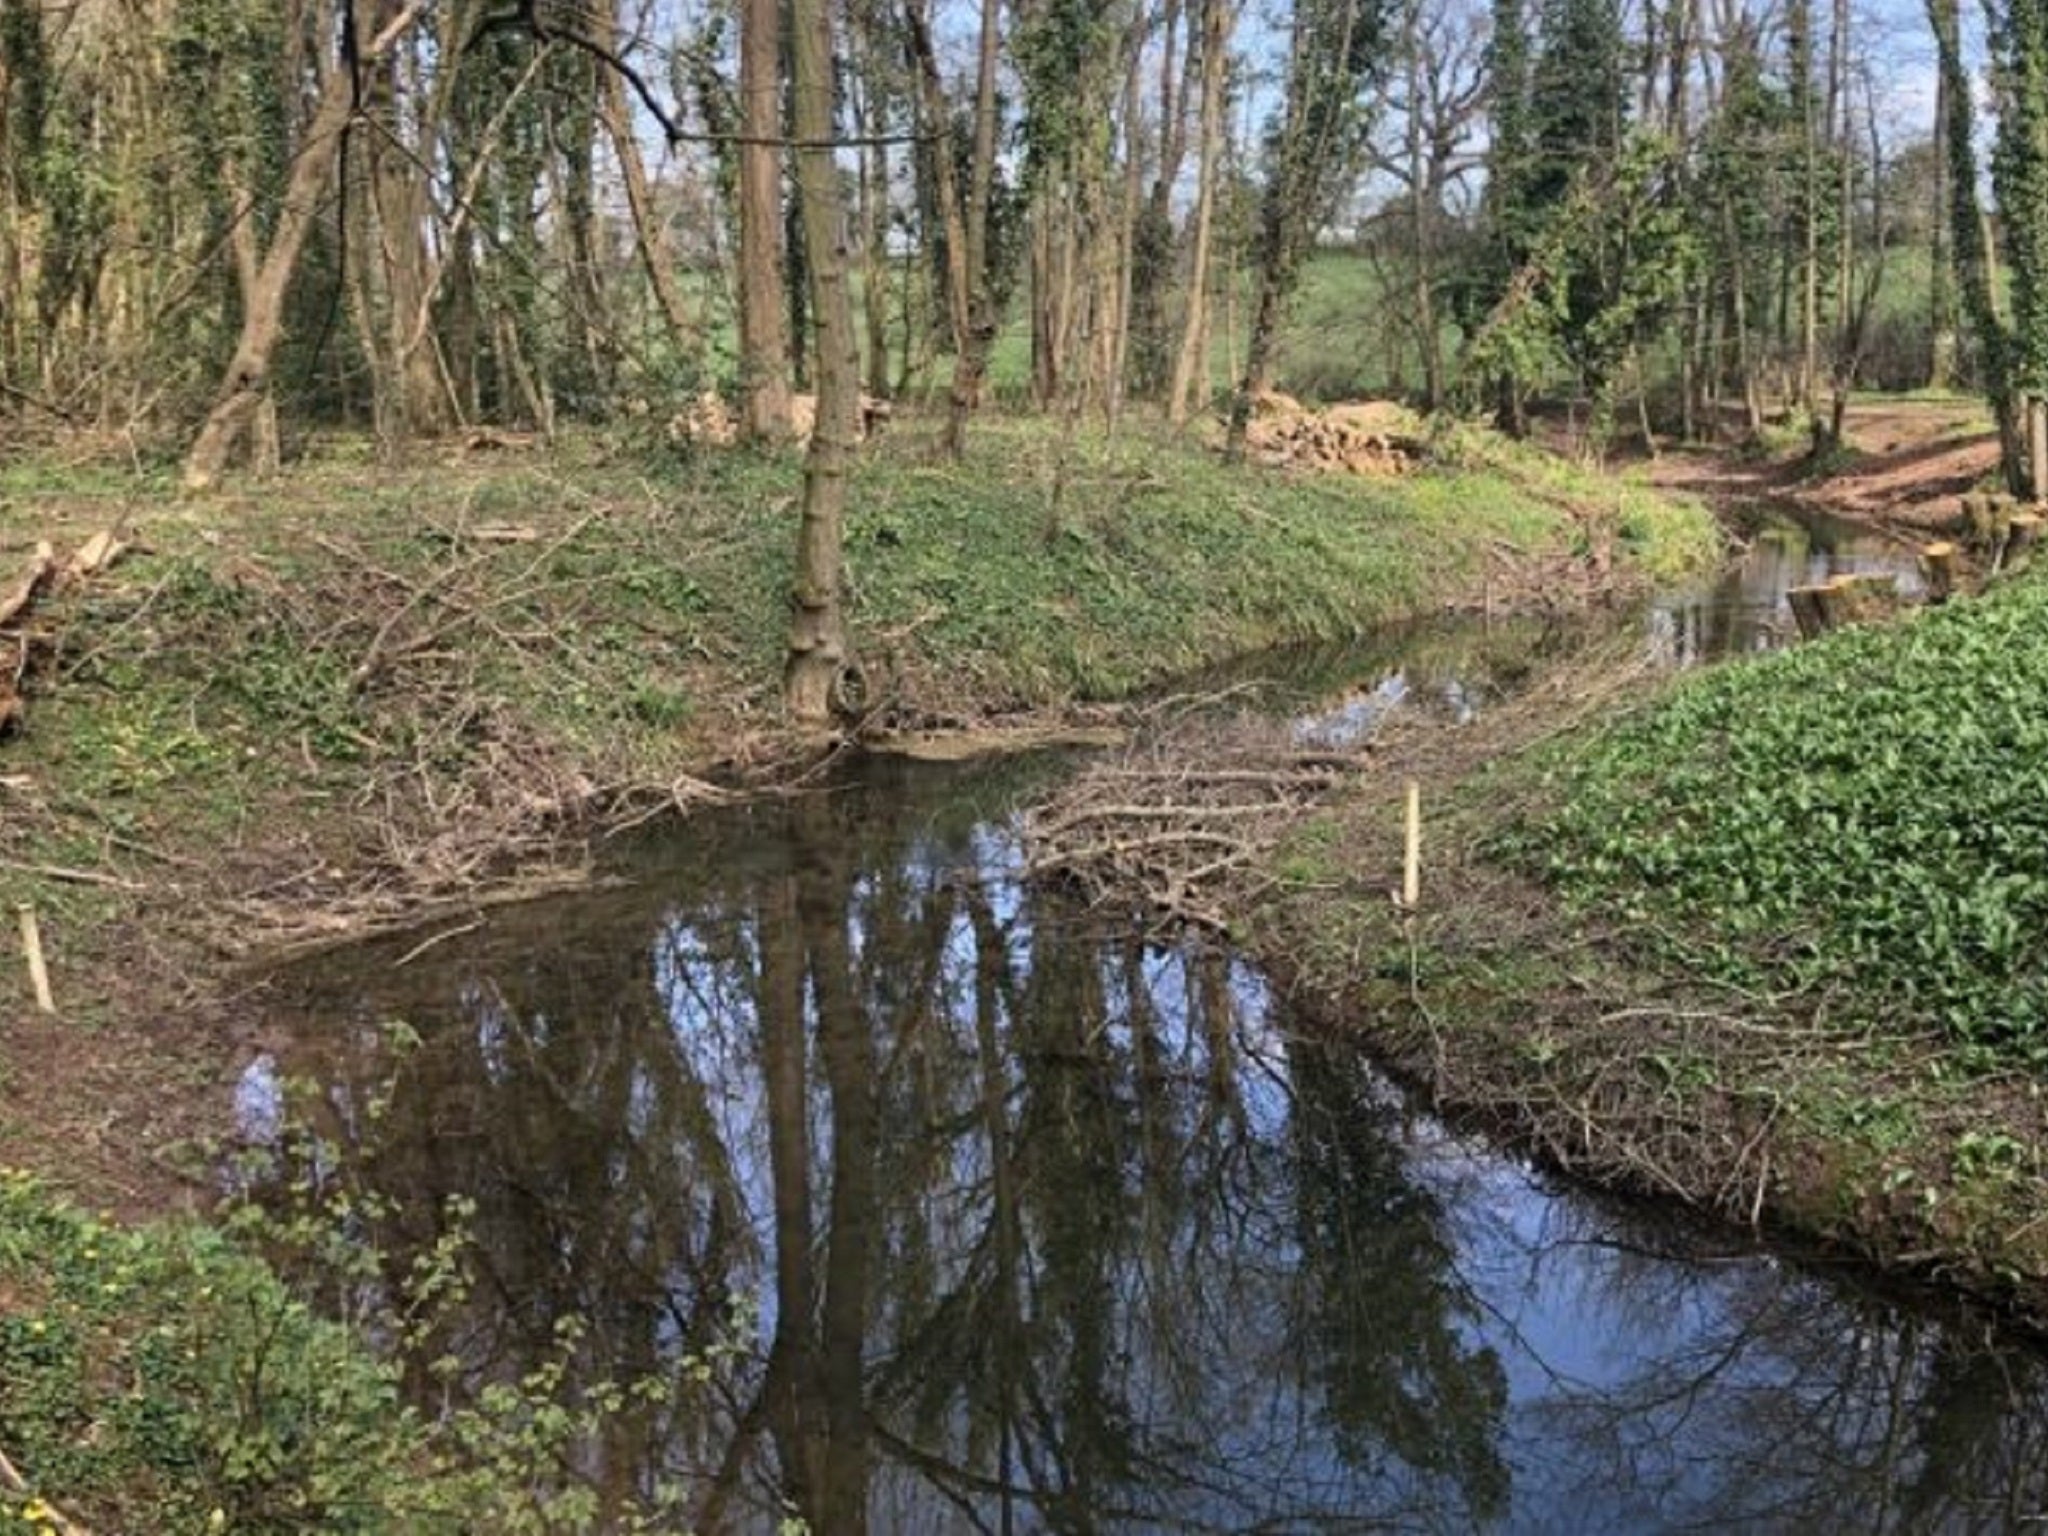 An unnamed tributary of the River Chew in Somerset has returned more than 60 years after it dried up